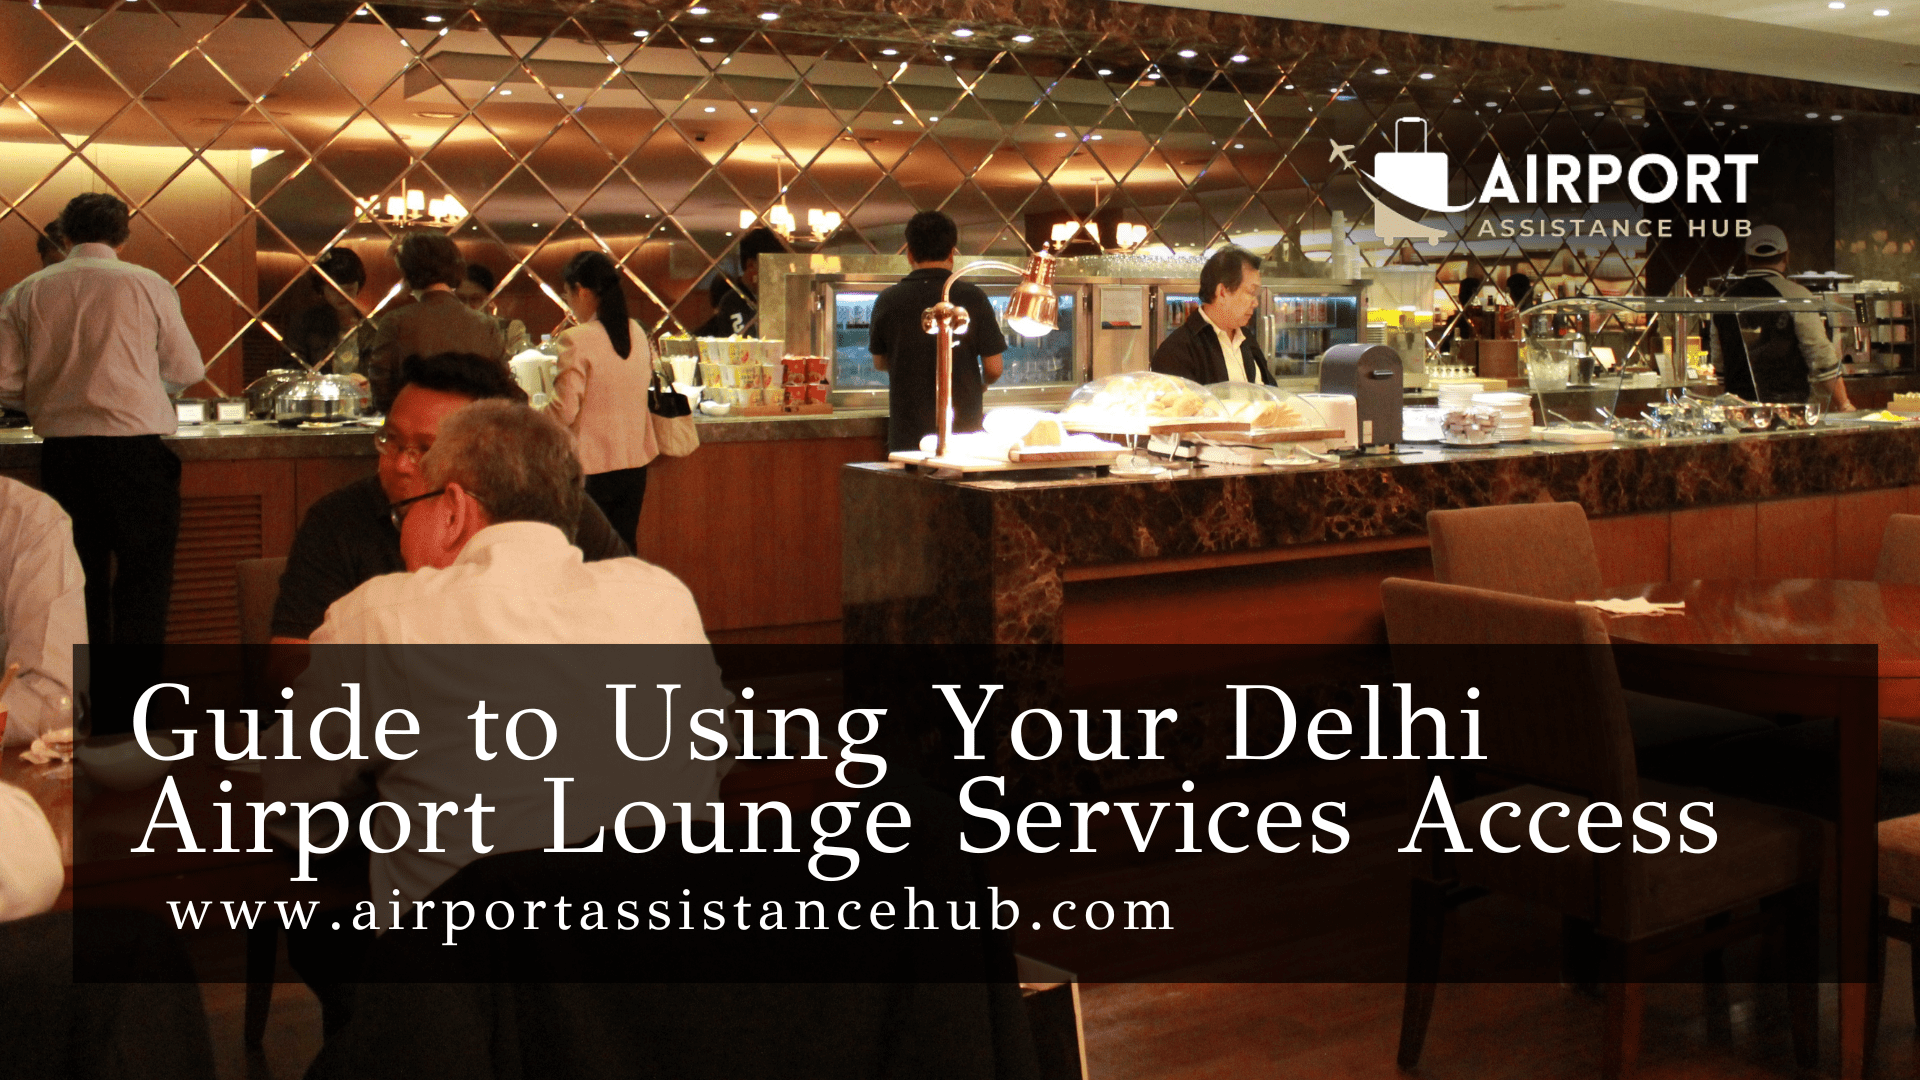 Guide to Using Your Delhi Airport Lounge Services Access